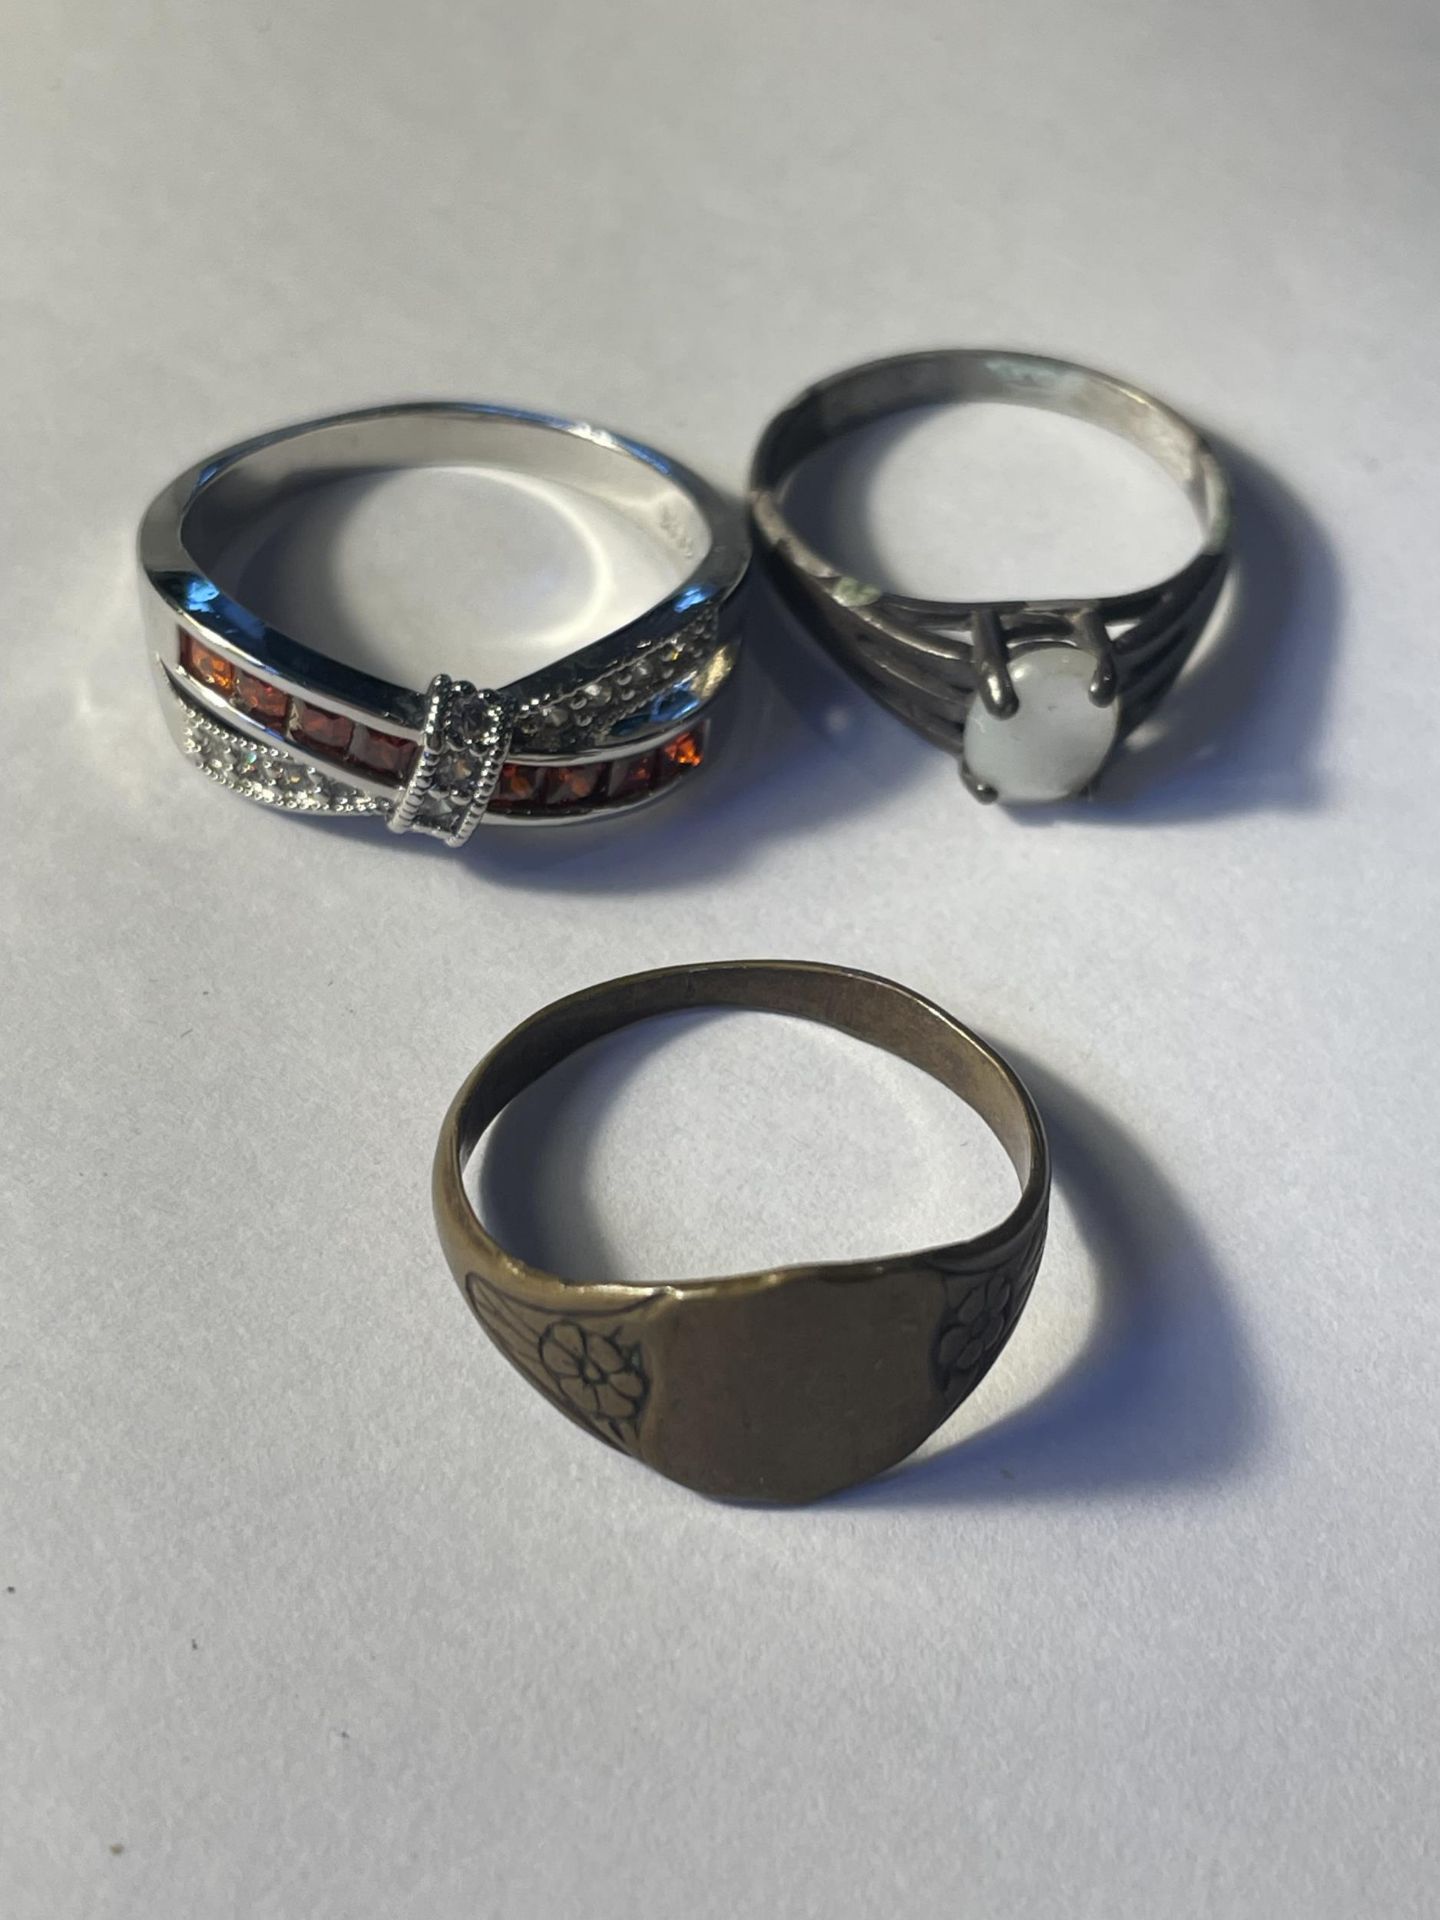 SIX VARIOUS SILVER RINGS - Image 3 of 3